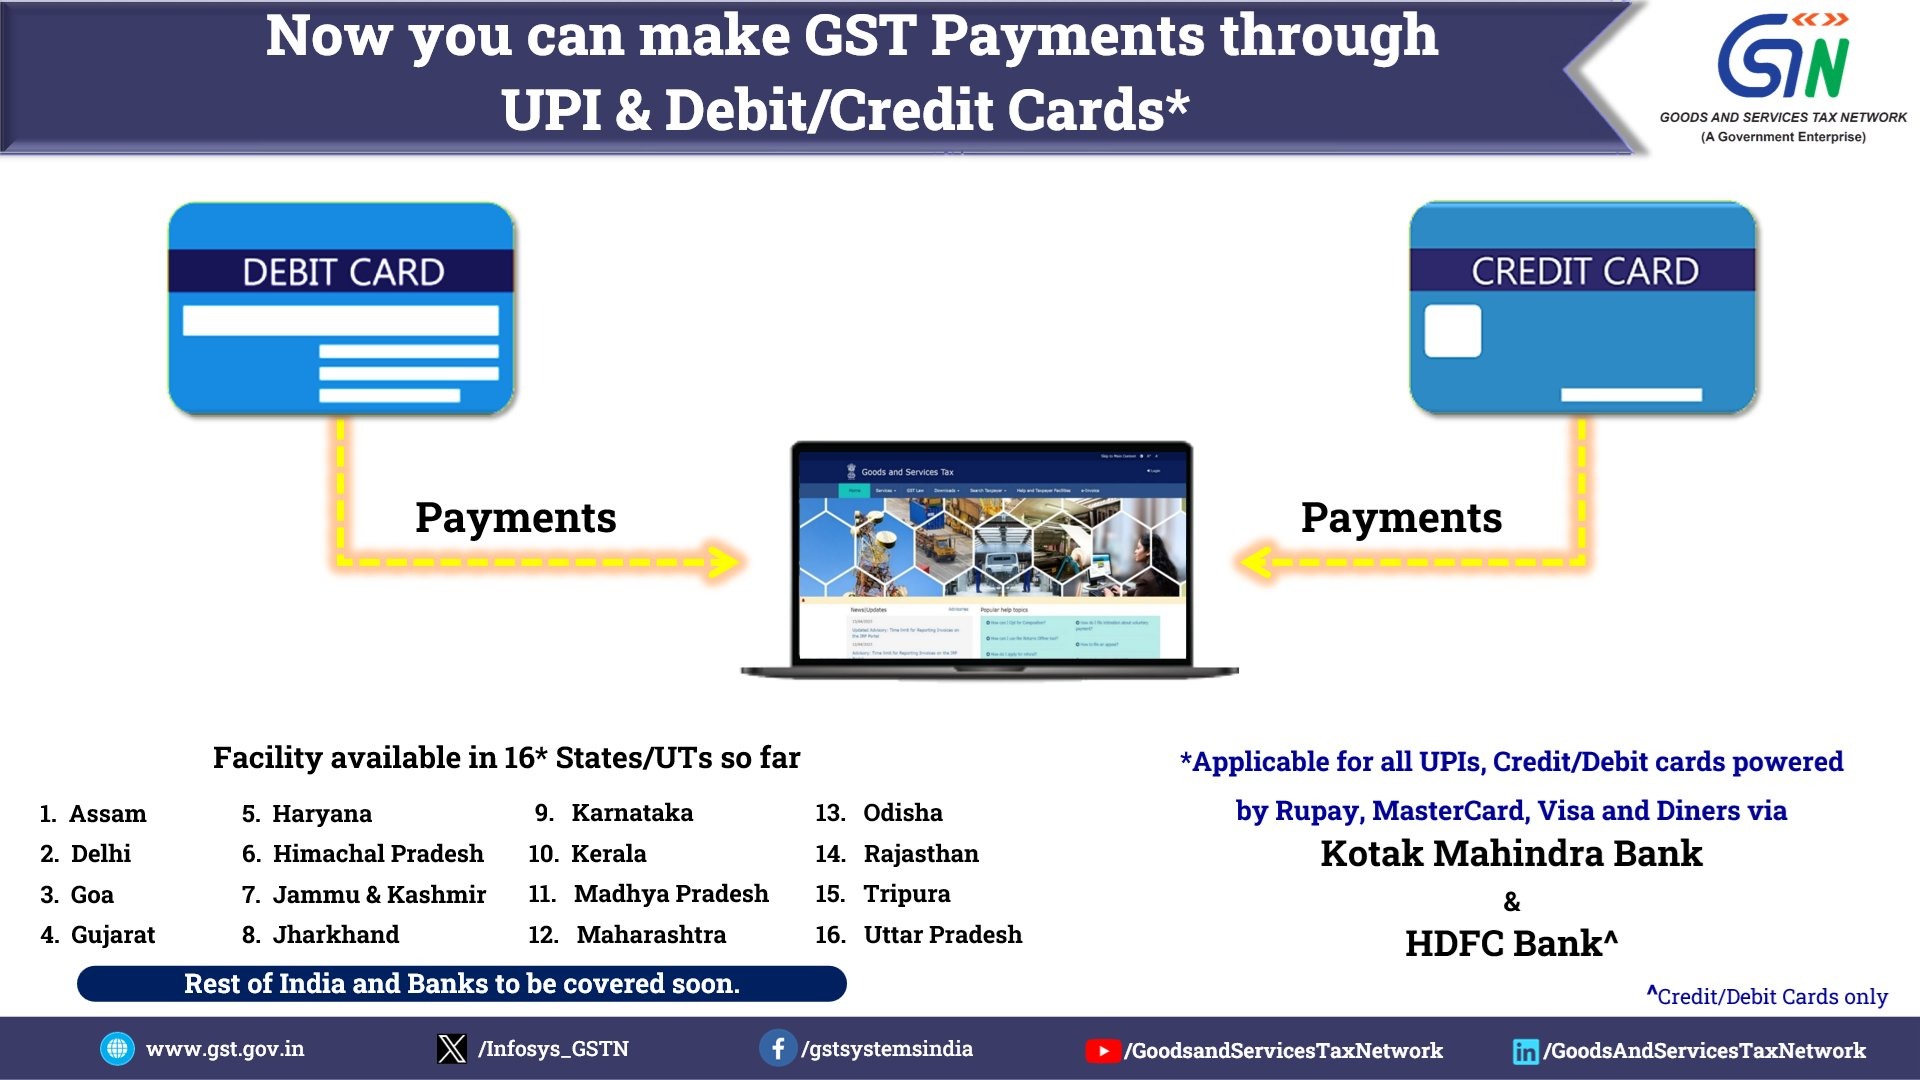 GST Payments Now Available via HDFC Bank Payment Gateway